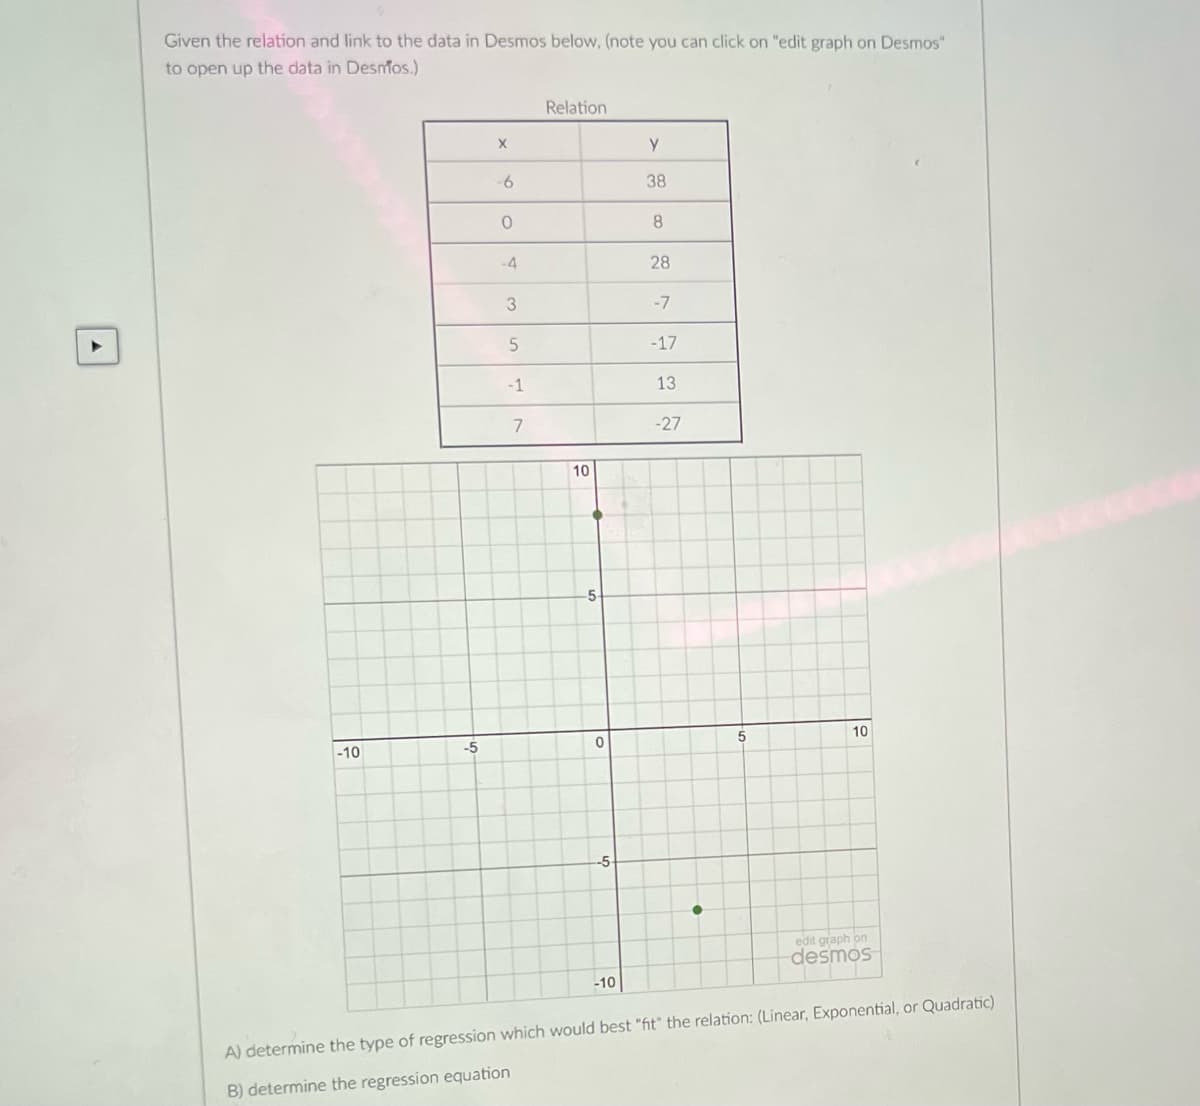 Given the relation and link to the data in Desmos below, (note you can click on "edit graph on Desmos"
to open up the data in DesMos.)
Relation
y
-6-
38
-4
28
-7
-17
-1
13
-27
10
-5-
10
-10
-5
edit graph on
desmos
-10
A) determine the type of regression which would best "fit" the relation: (Linear, Exponential, or Quadratic)
B) determine the regression equation
